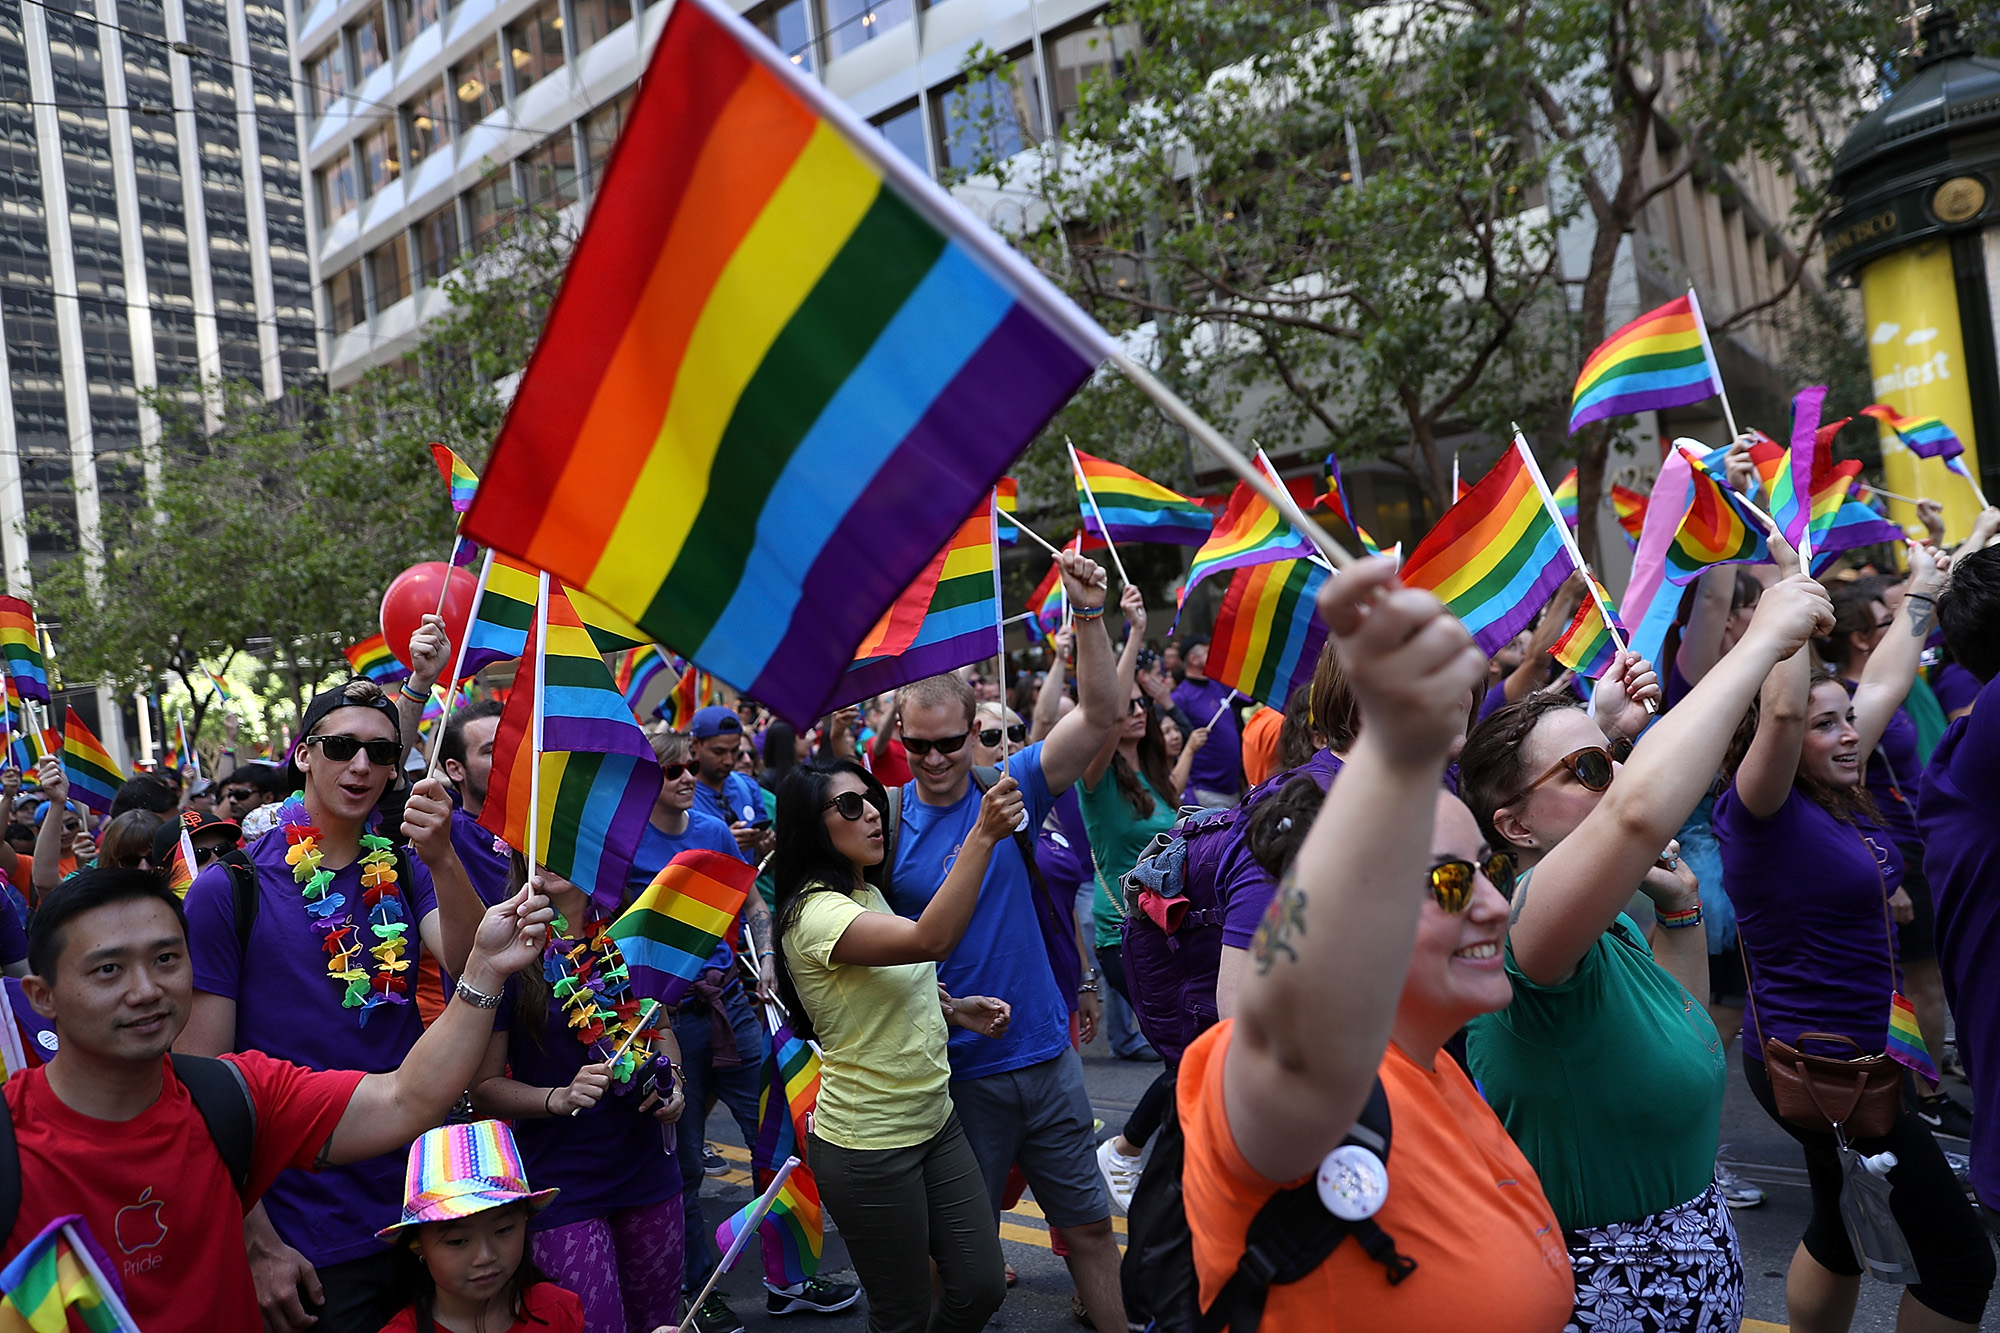 Parade participants wave pride flags as the march during the 2016 San Francisco Pride Parade on June 26, 2016.